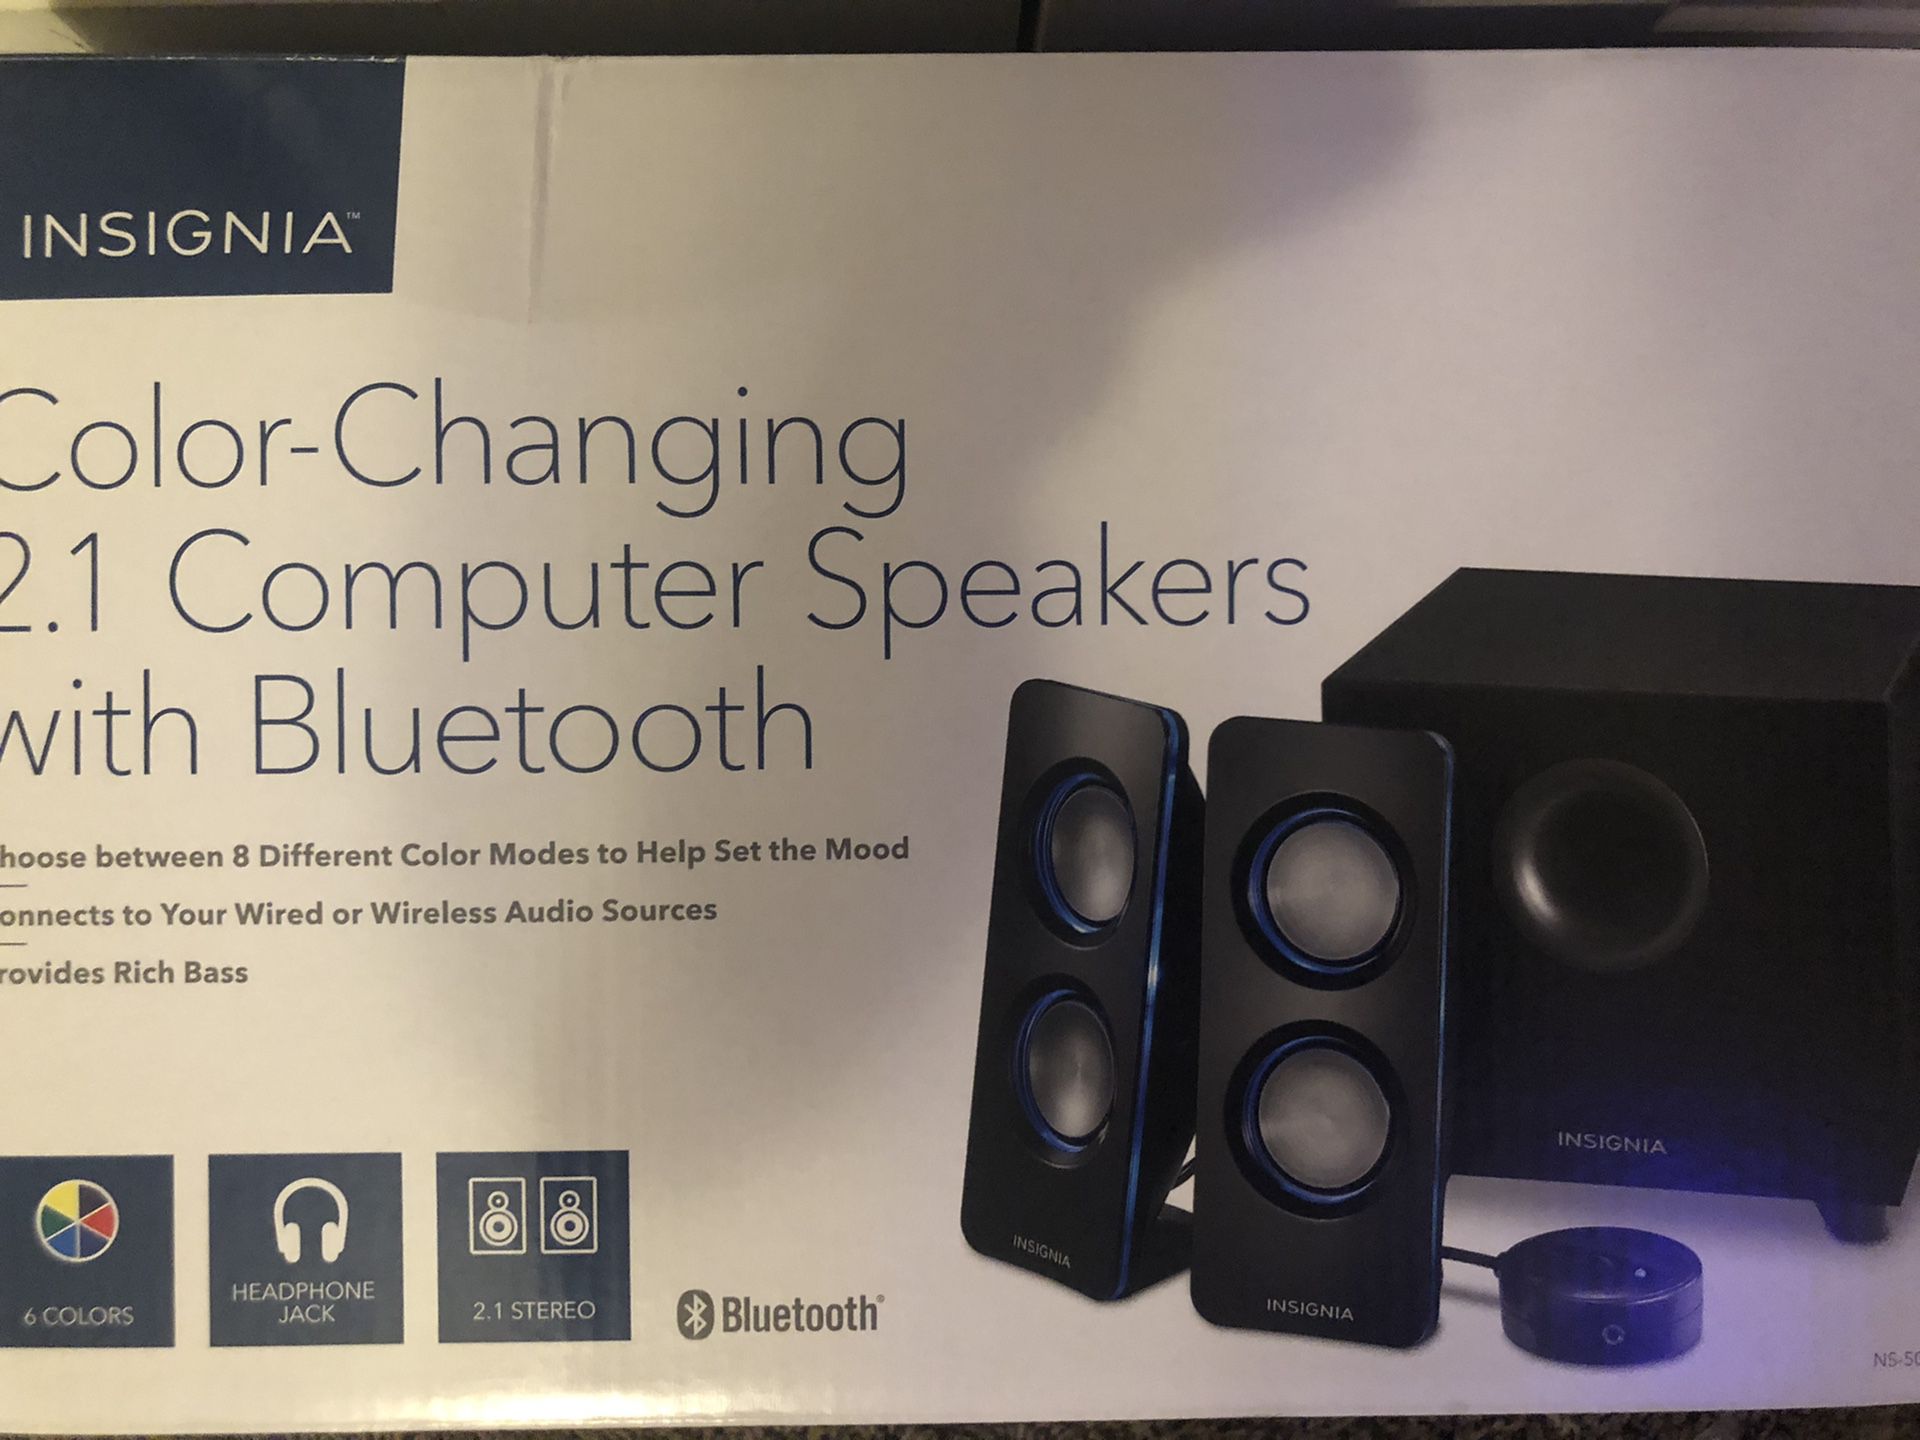 Color changing 2.1 computer speakers with Bluetooth